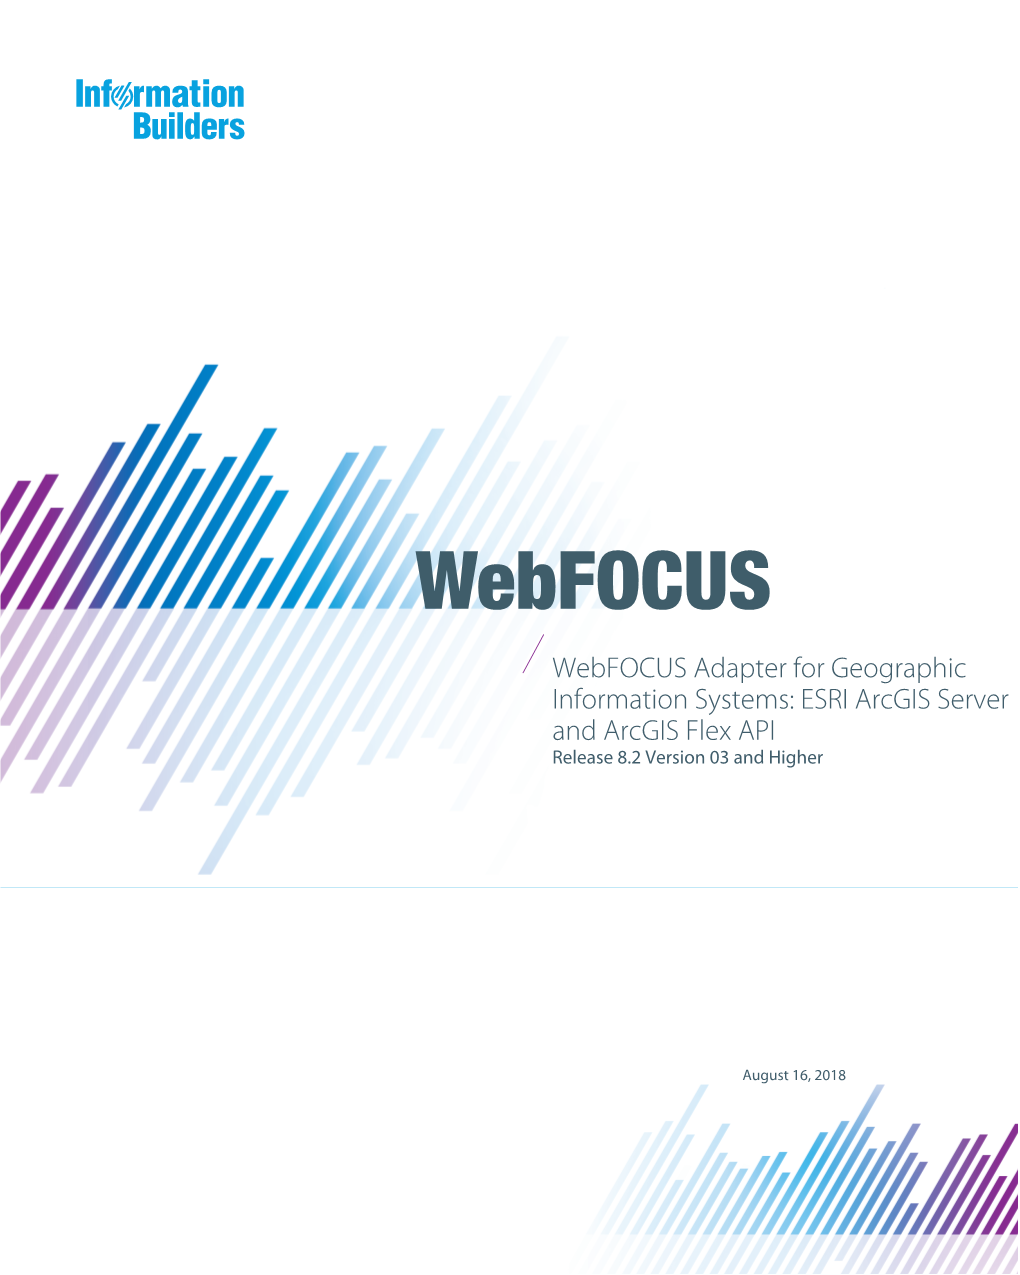 Webfocus Adapter for Geographic Information Systems: ESRI Arcgis Server and Arcgis Flex API Release 8.2 Version 03 and Higher